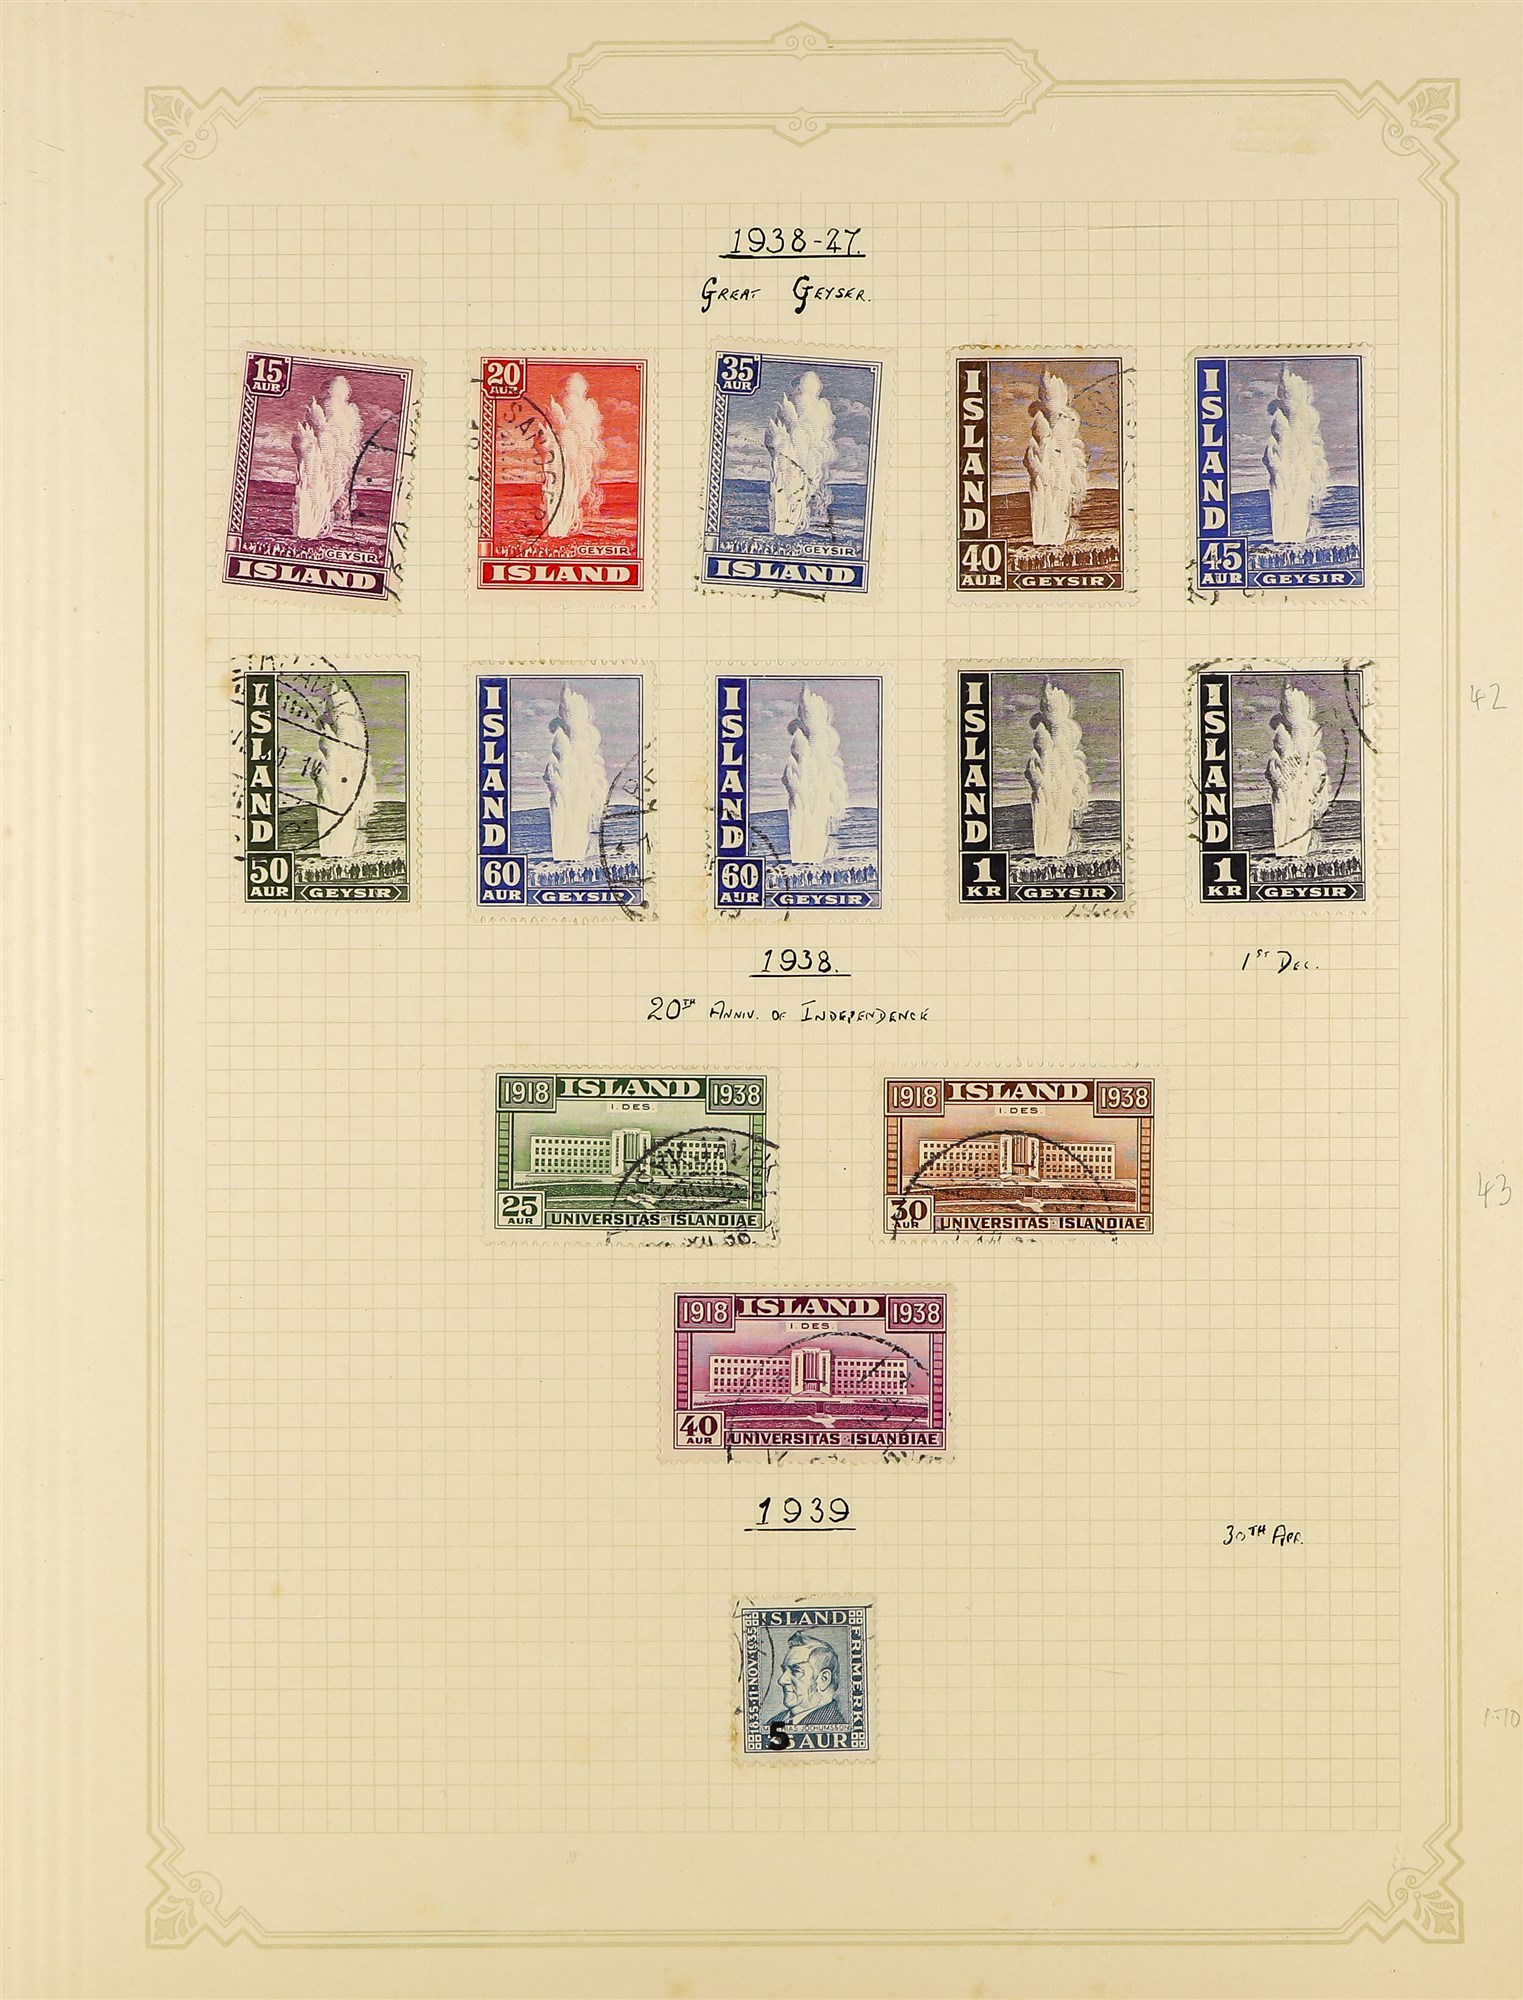 ICELAND 1901 - 1976 COLLECTION of over 700 used stamps on album pages, chiefly complete sets. Cat £ - Image 10 of 26